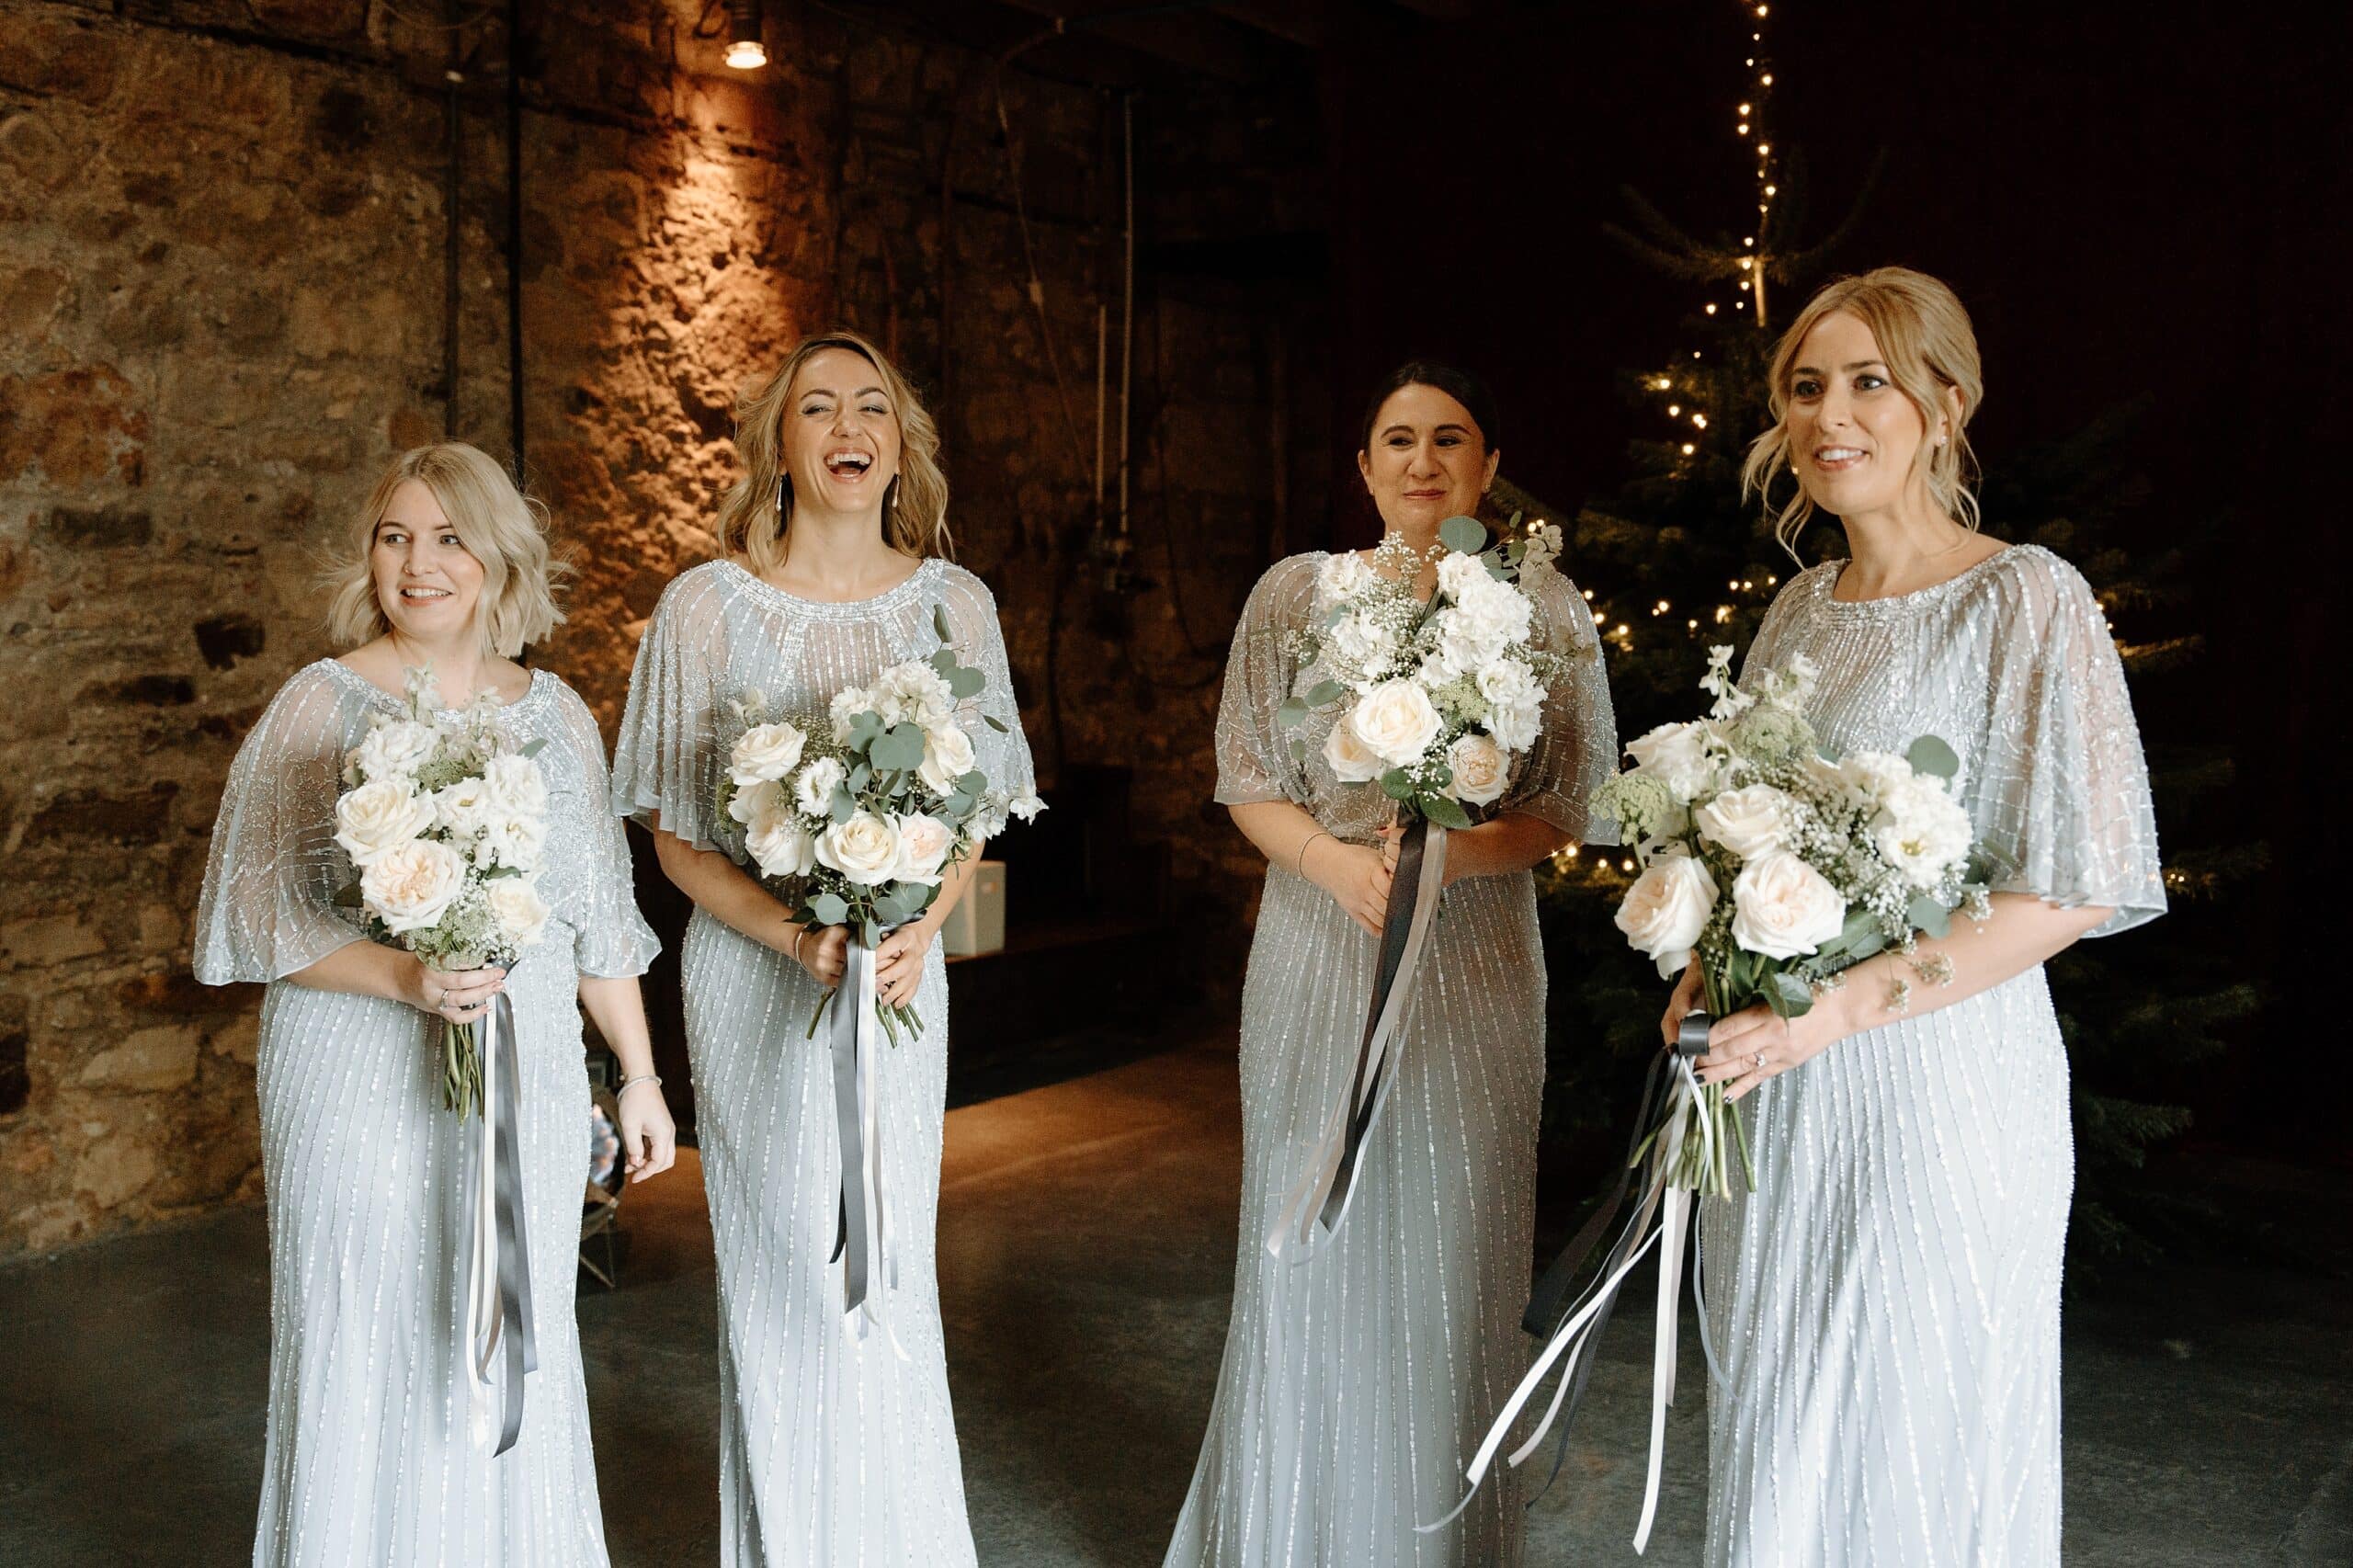 kinkell byre wedding photos bridesmaids in silver sparkly dresses waiting at the entrance to the venue